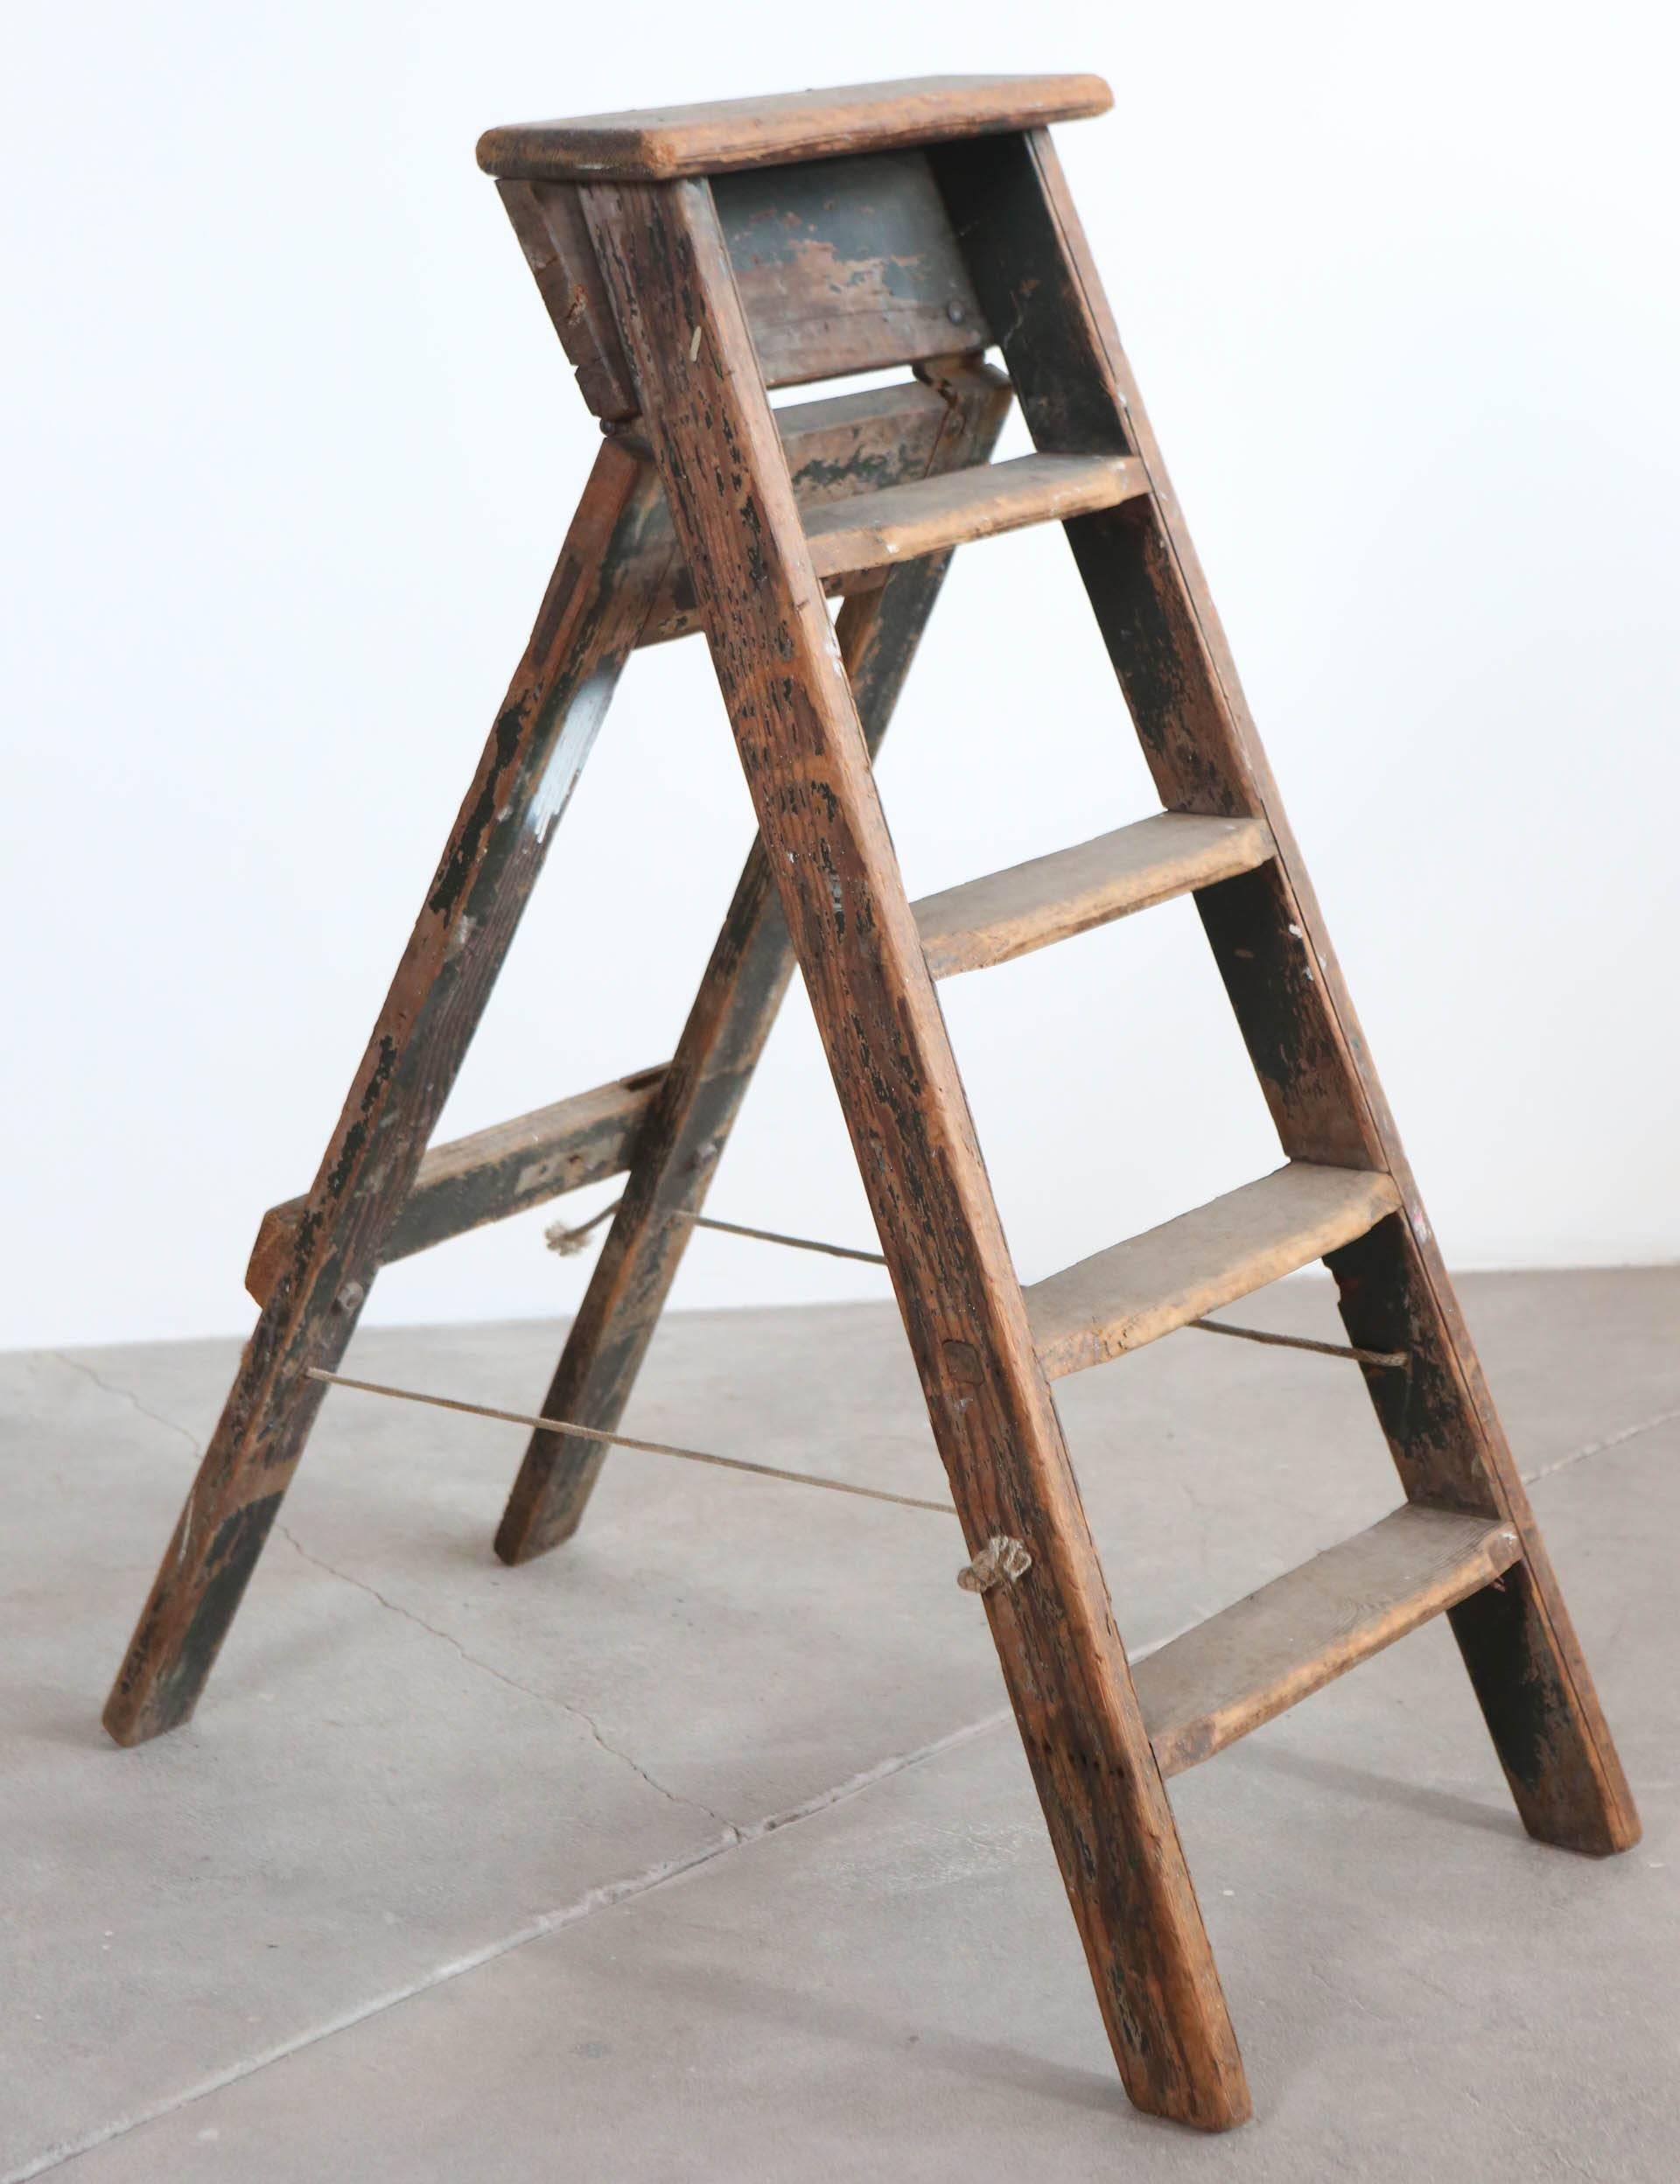 Rustic five-step wooden ladder with rope hinge.